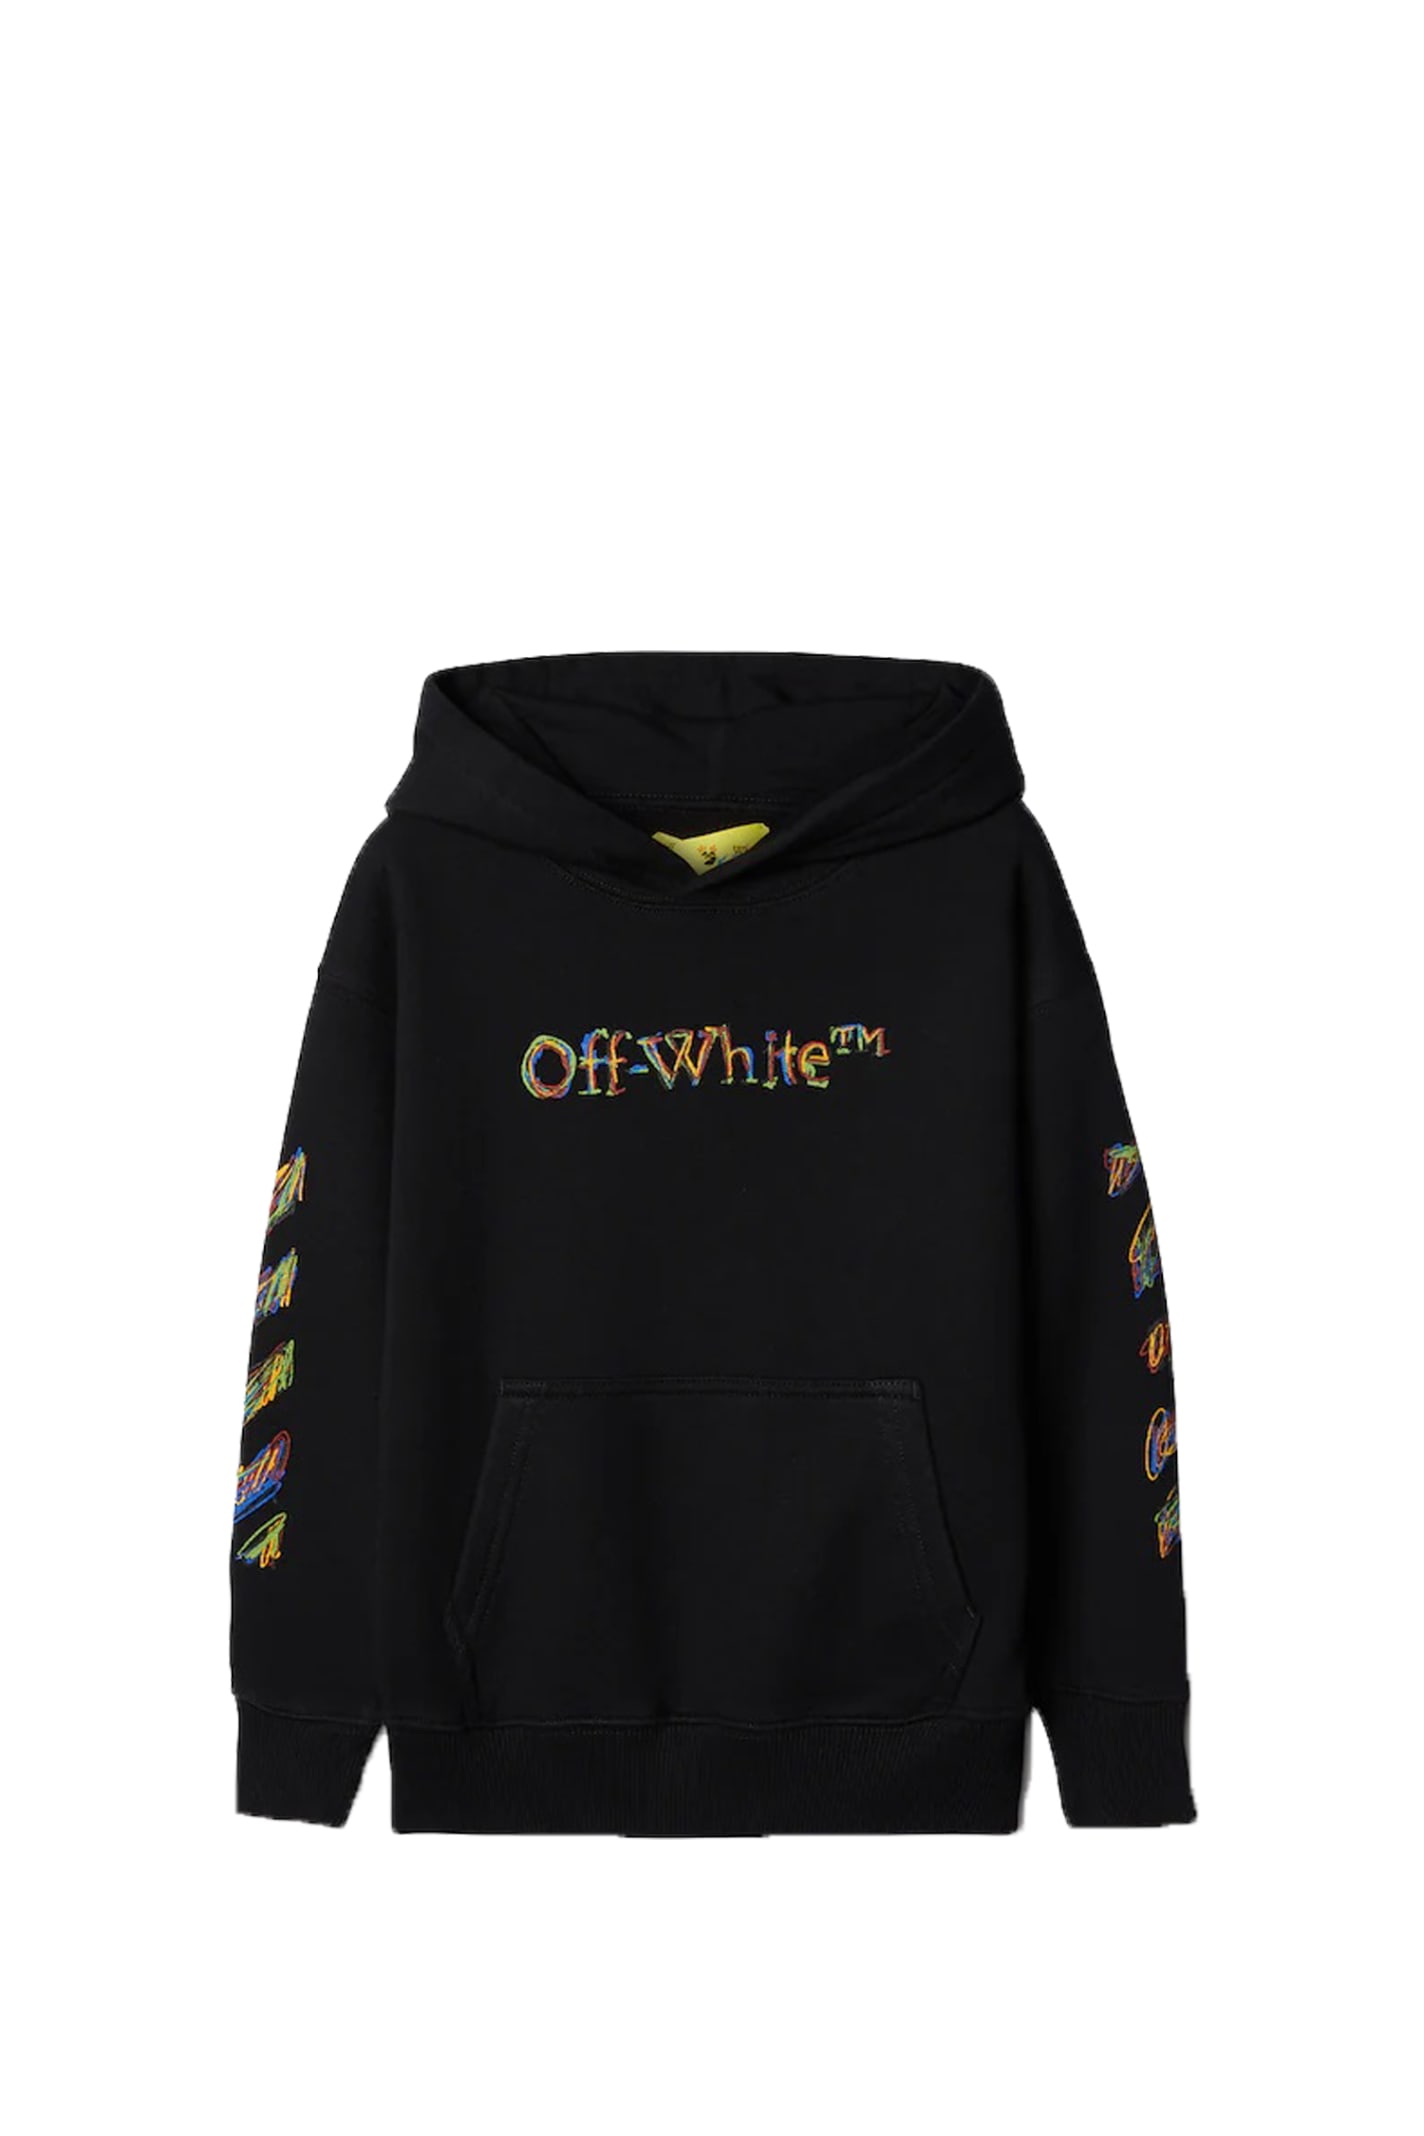 OFF-WHITE SWEATSHIRT WITH HOOD AND SKETCH LOGO